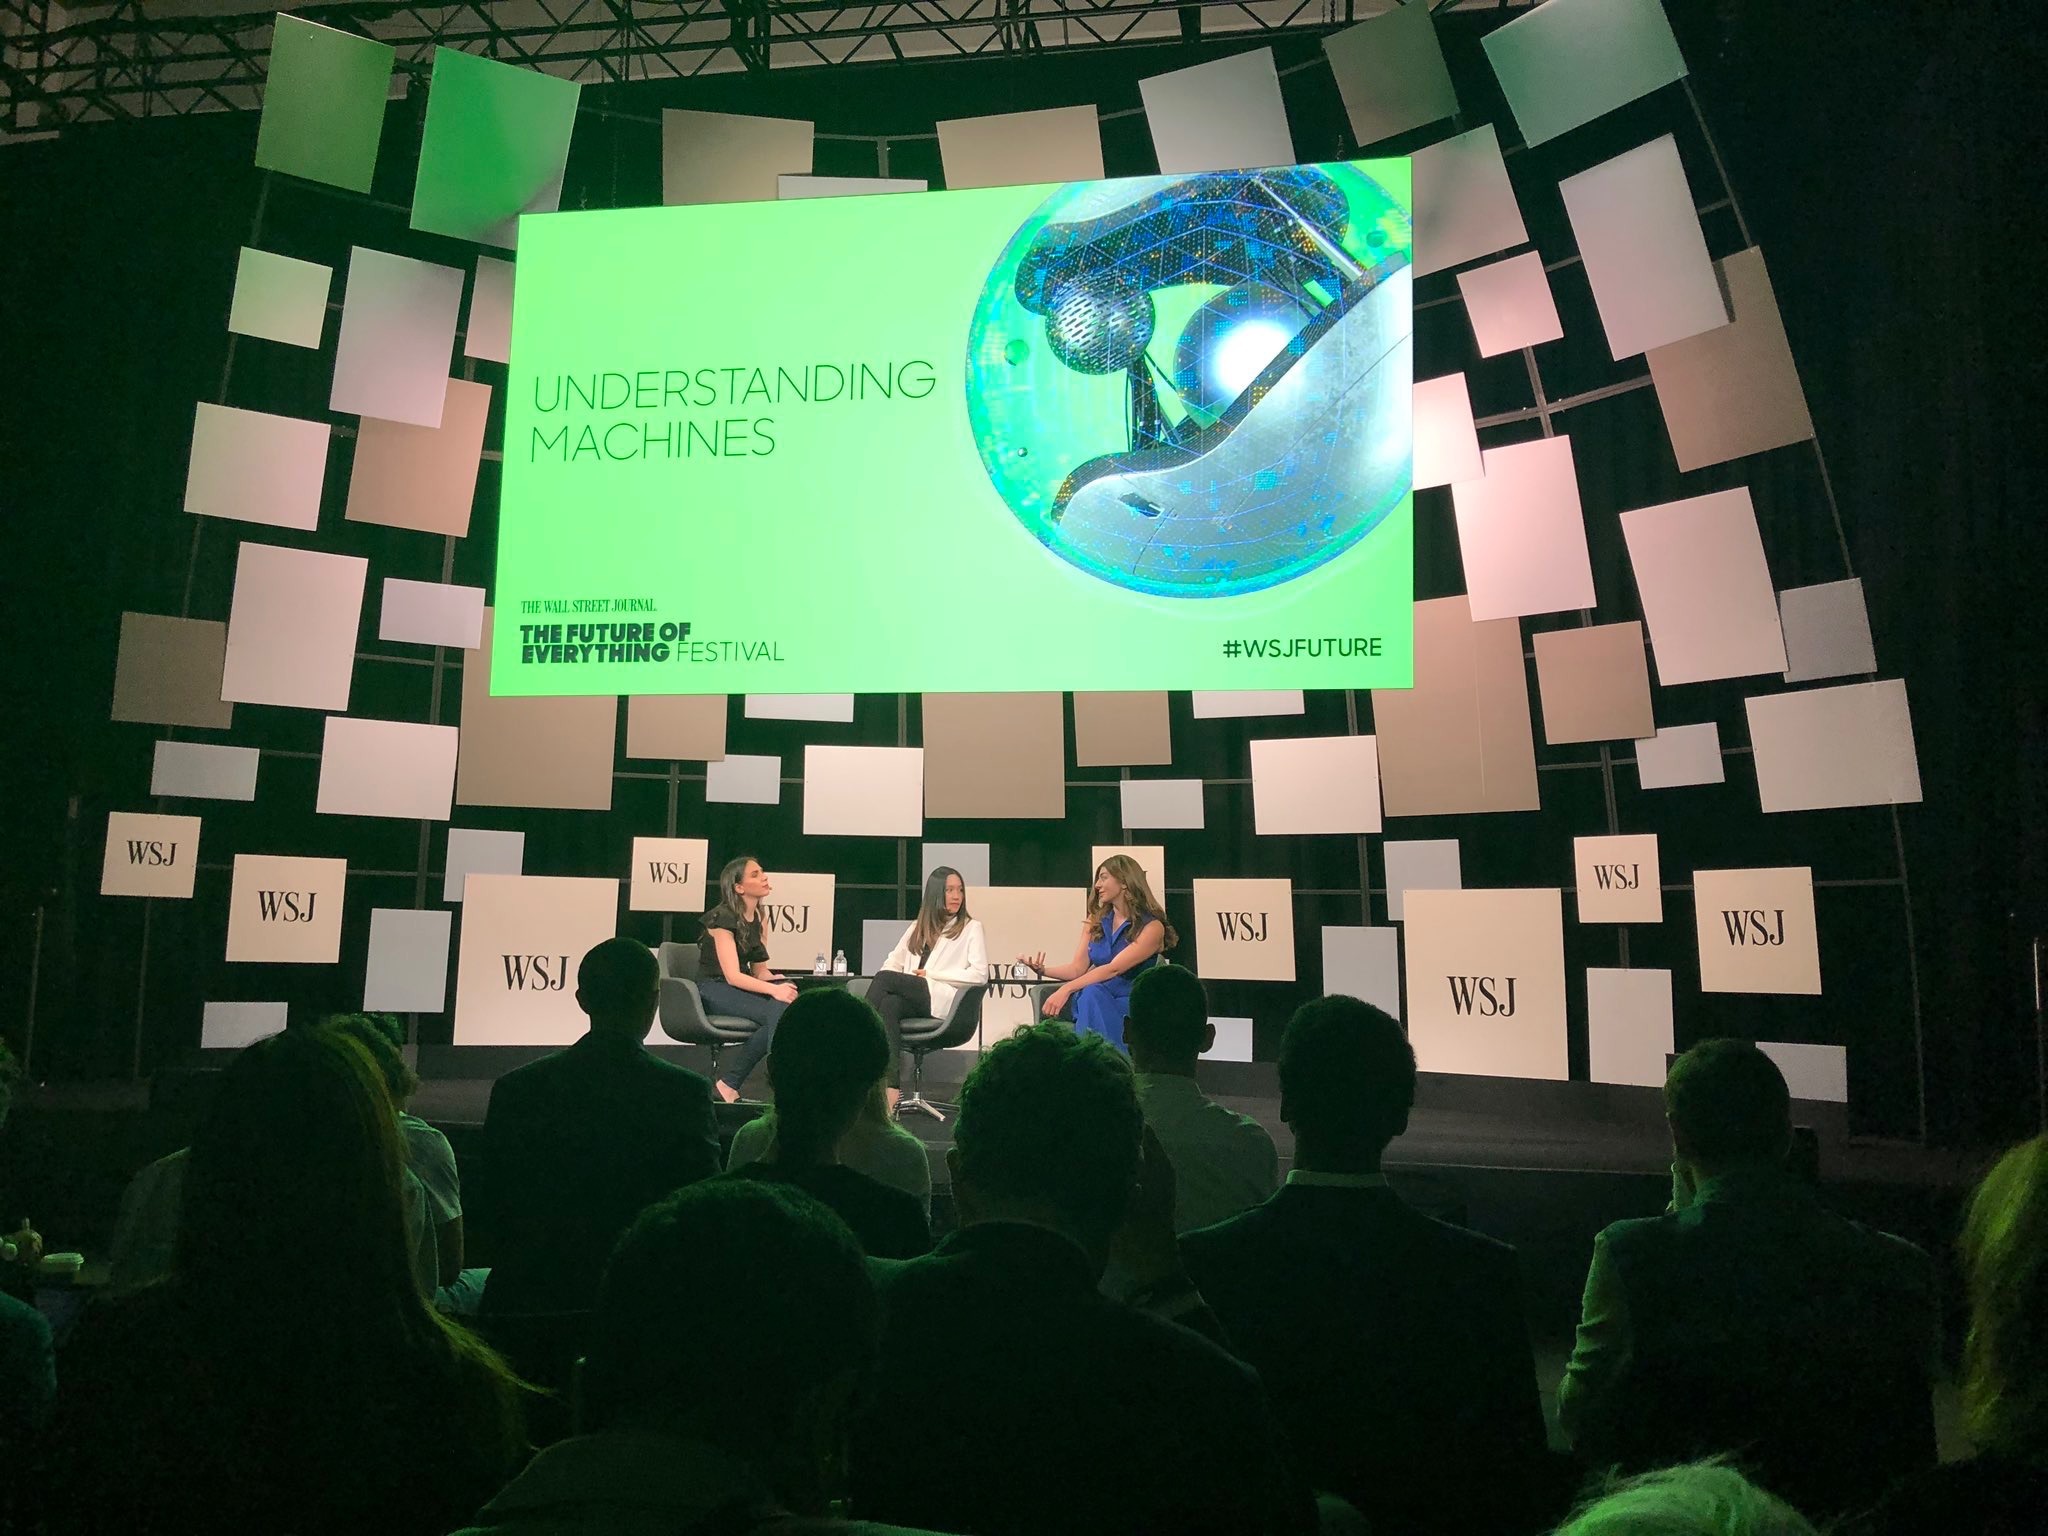 What’s Keeping Tech Leaders Up at Night: Takeaways from the WSJ Future of Everything Festival